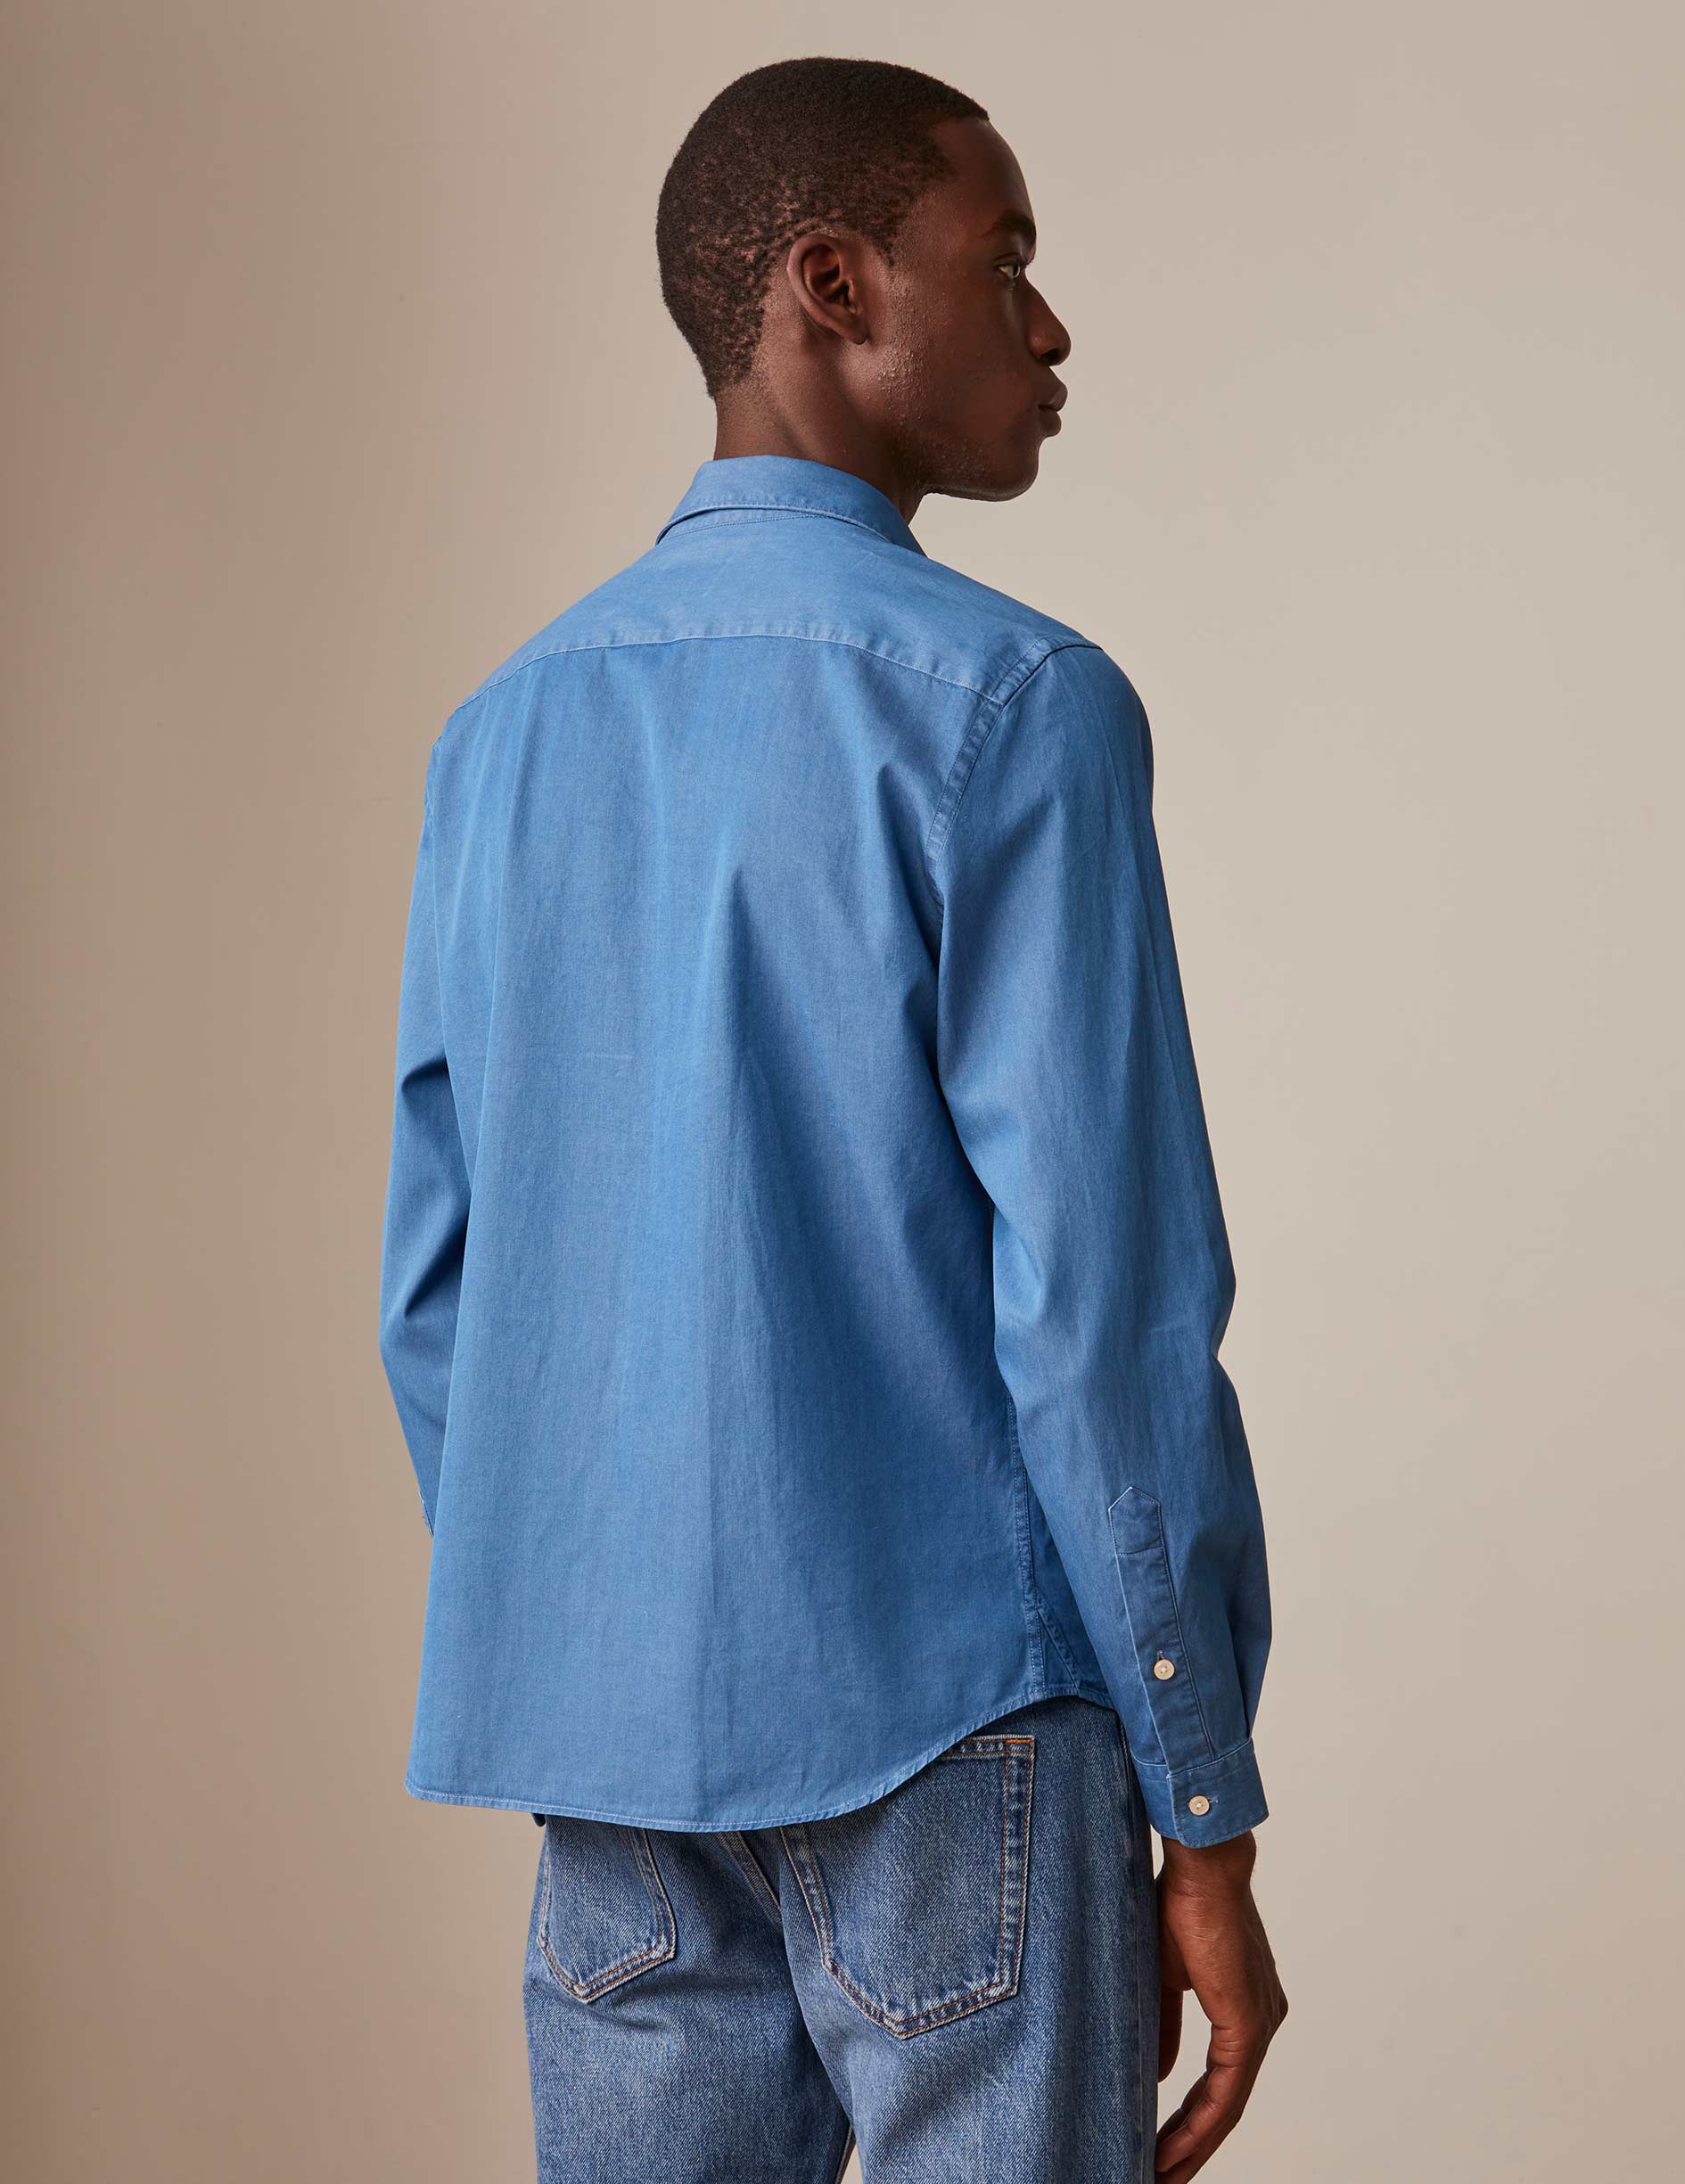 Blue denim "Je t'aime" shirt with blue embroidery - Denim - Figaret Collar